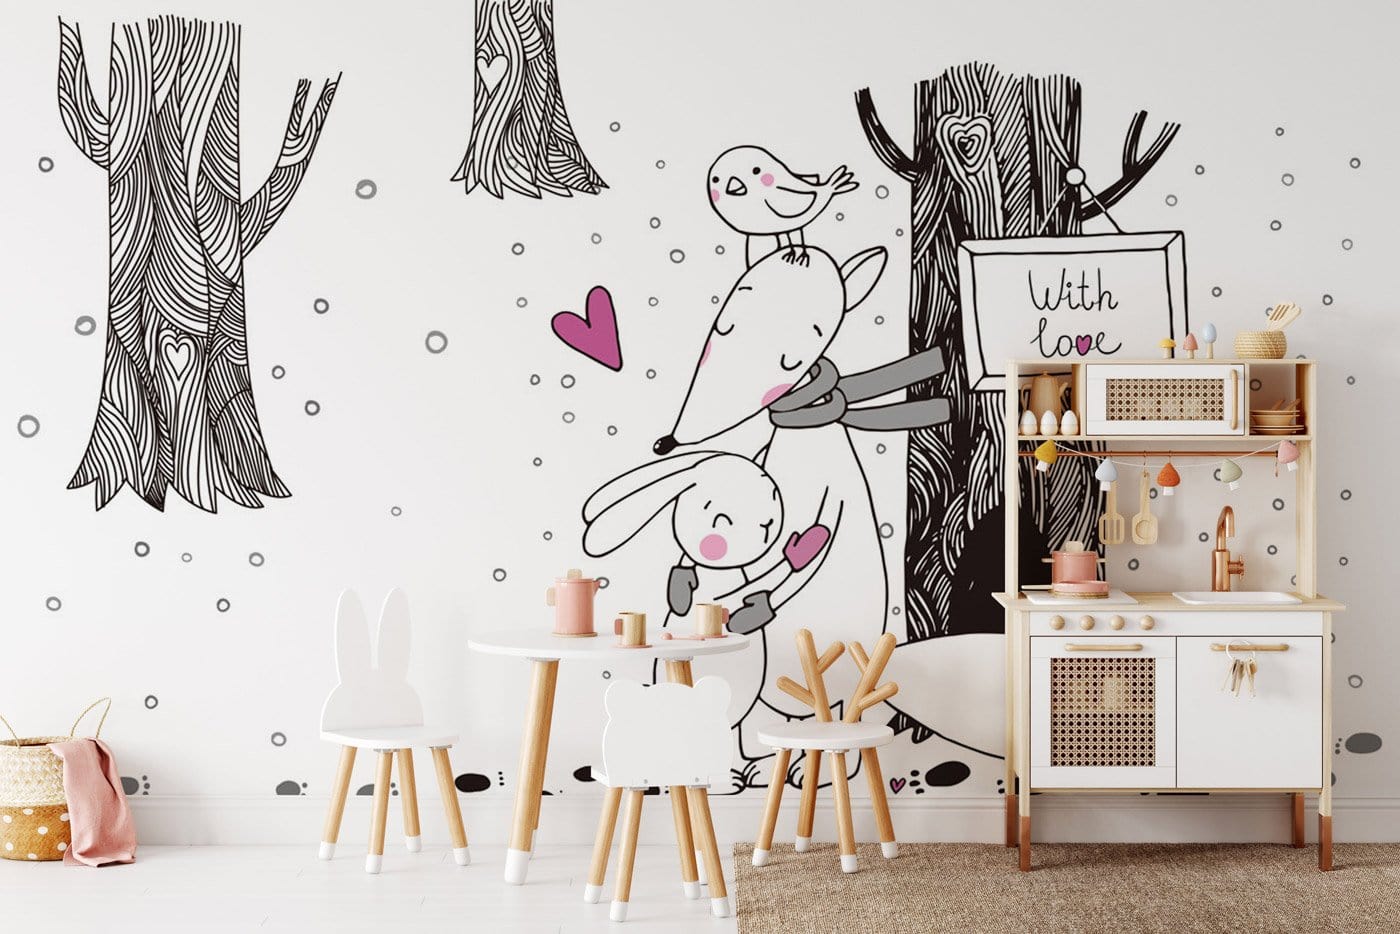 Wallpaper mural with animals sharing love for use in decorating a nursery.